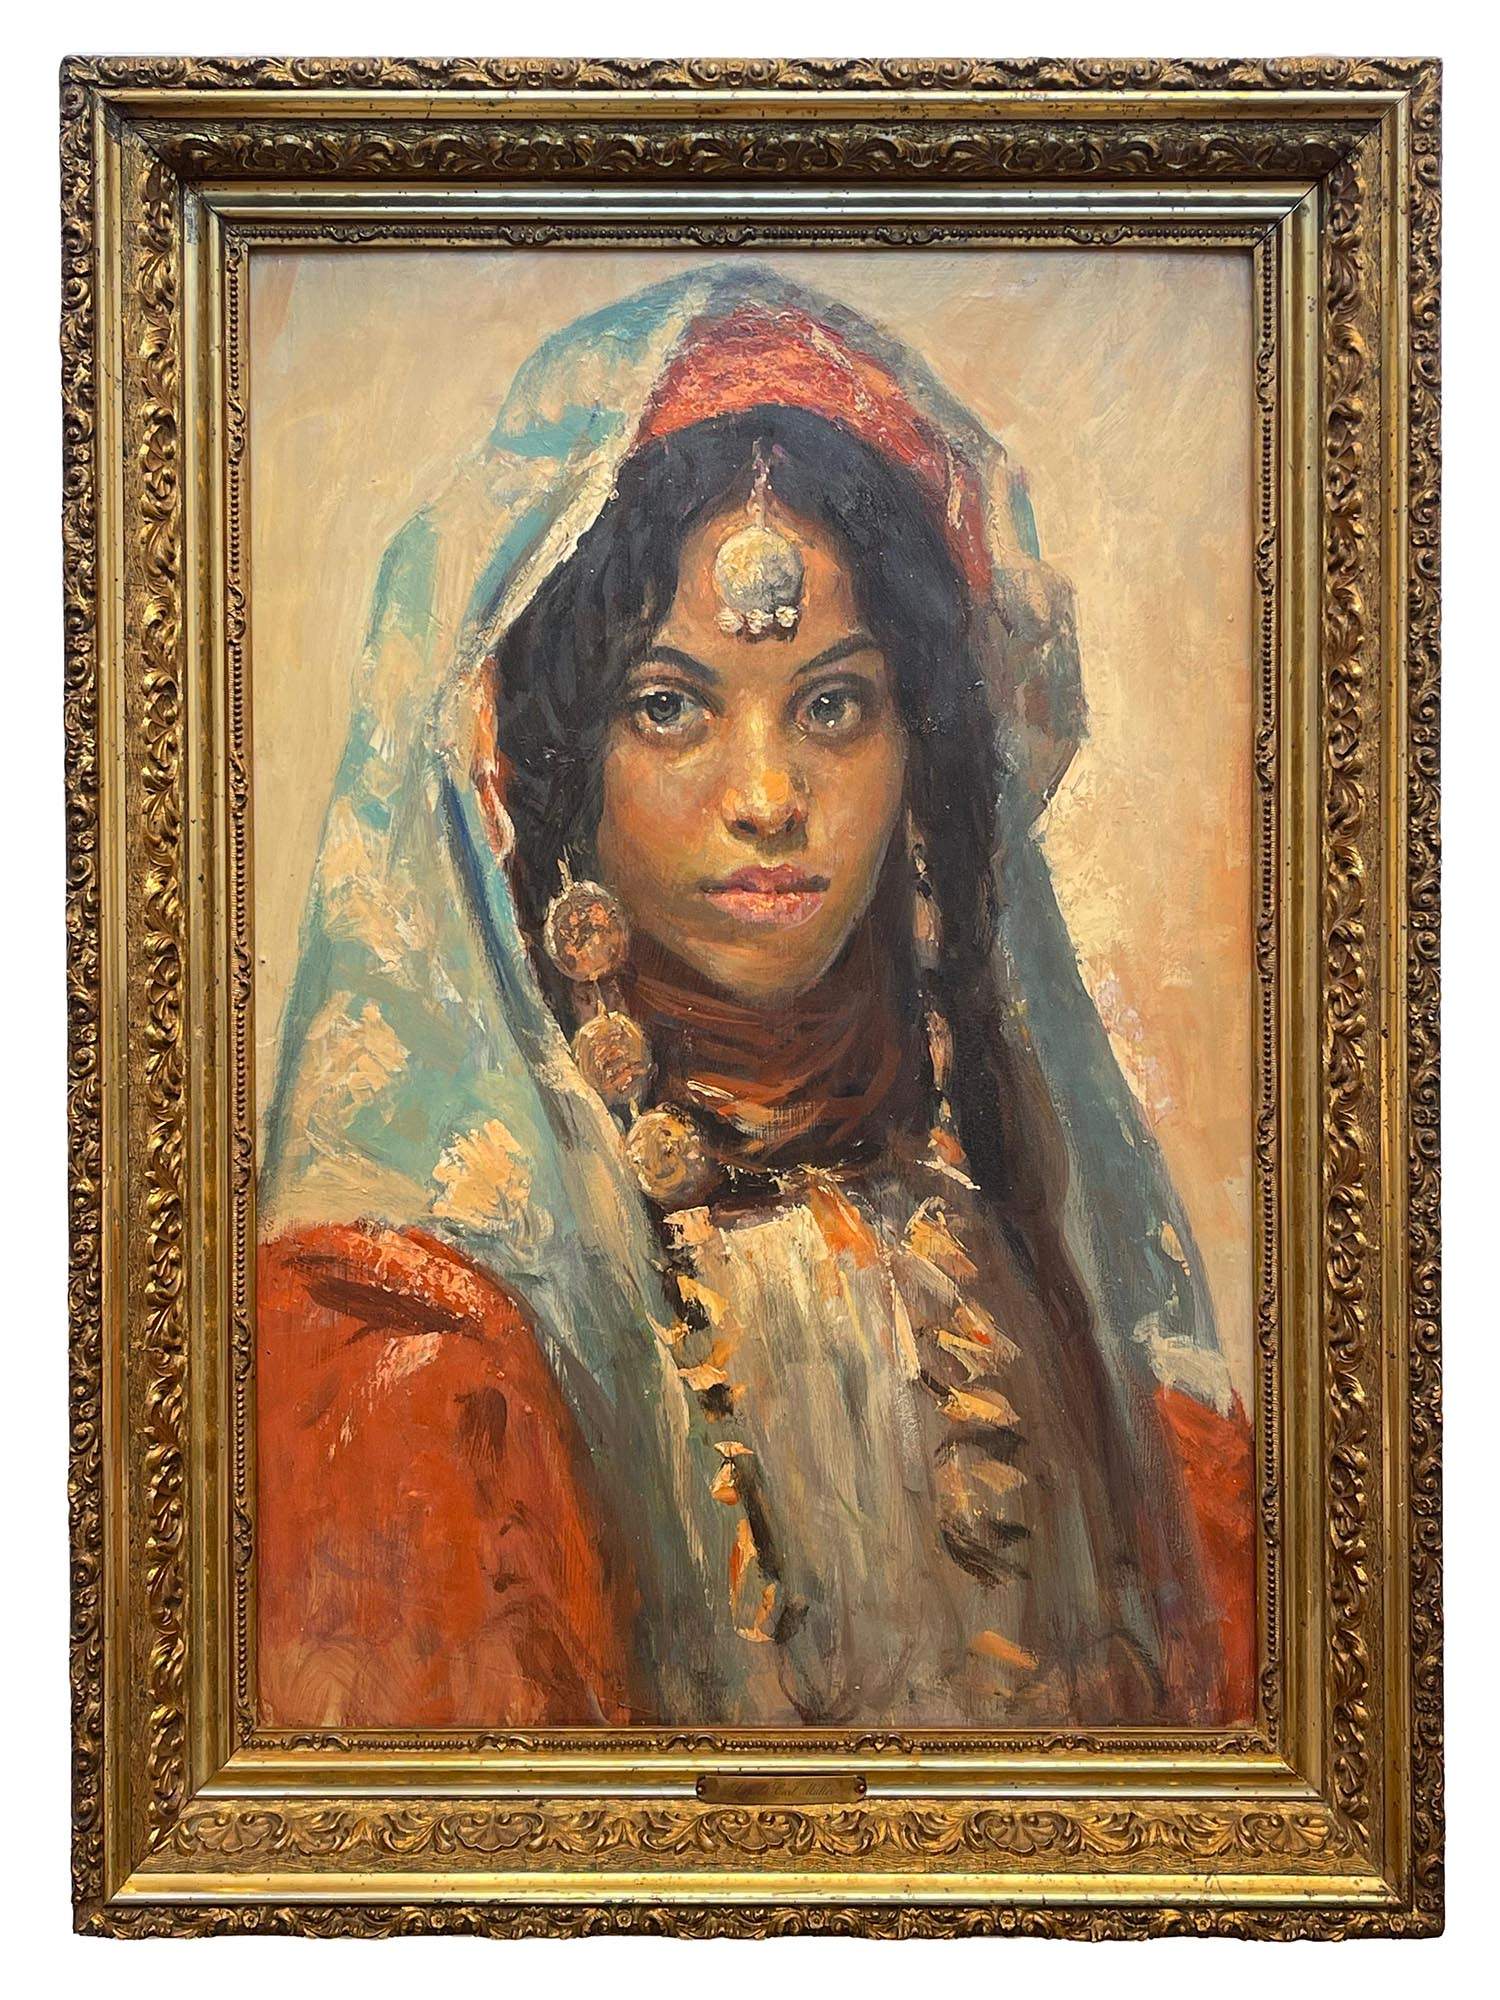 ATTR TO LEOPOLD CARL MULLER ORIENTAL PORTRAIT PAINTING PIC-0